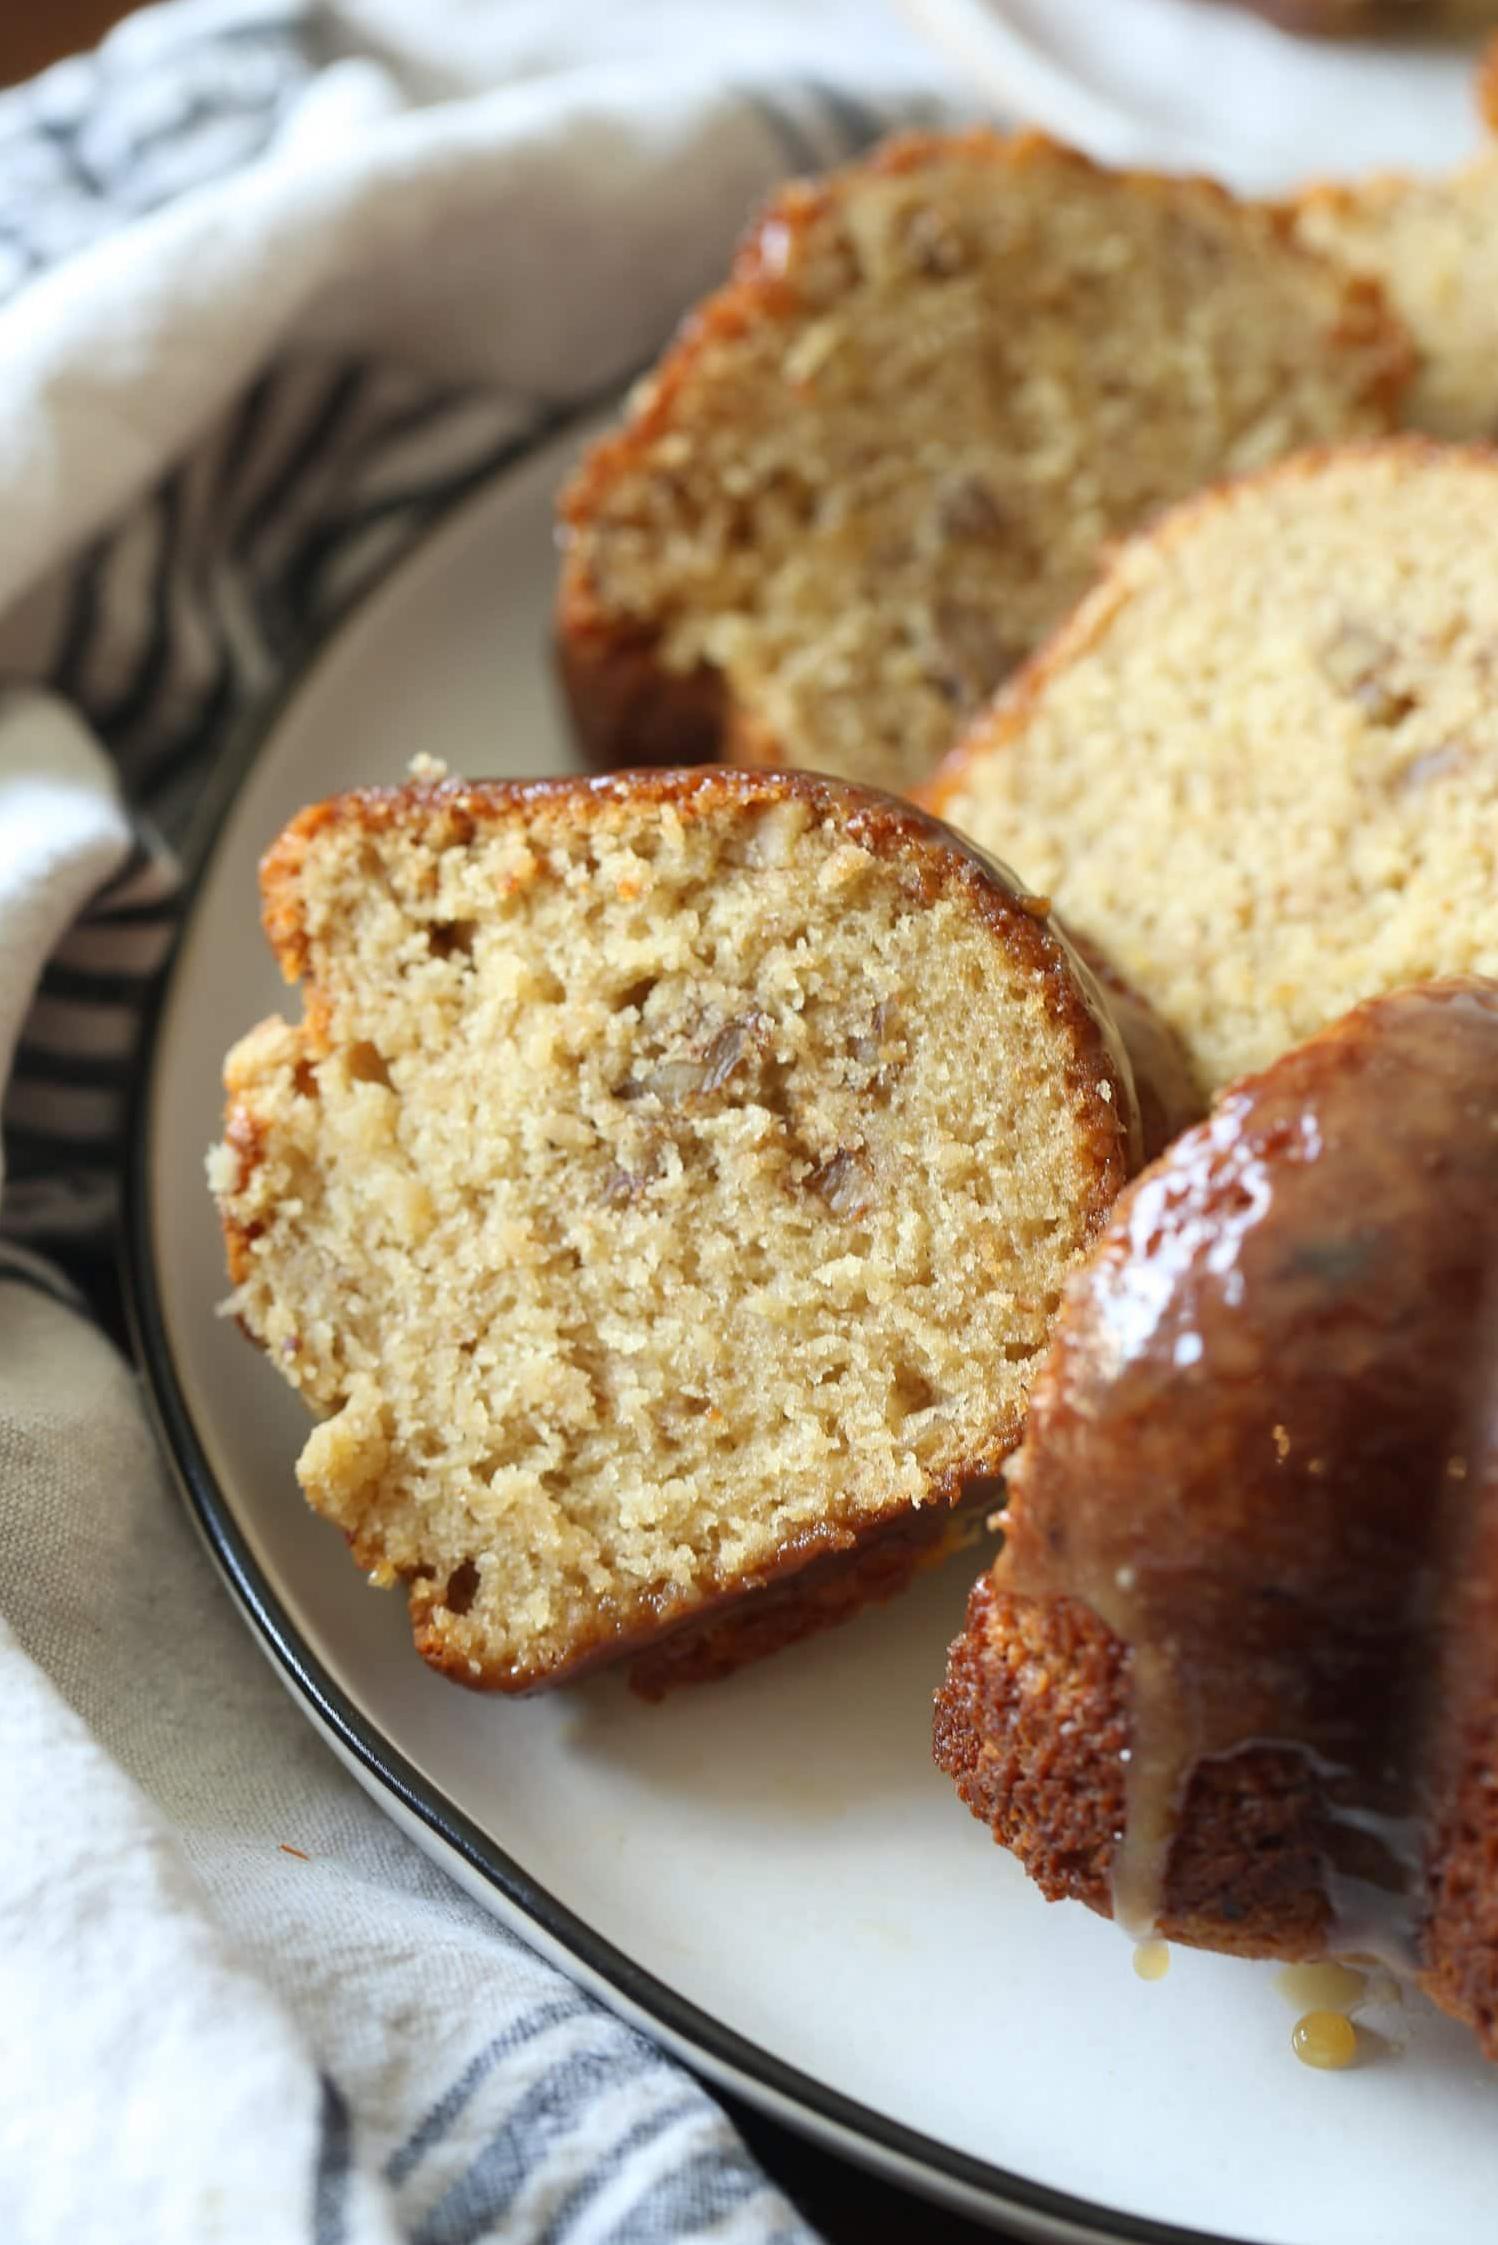  The aroma of freshly baked Banana Pound Cake is simply irresistible!